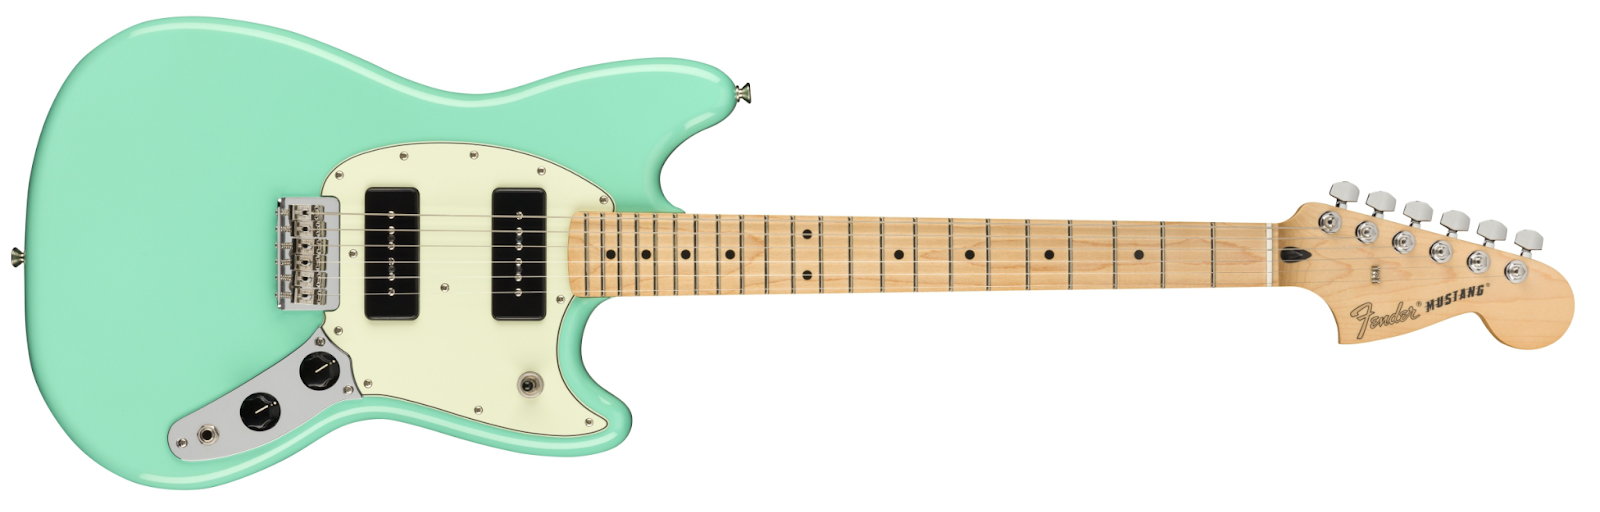 Fender Player Mustang 90 Electric Guitar for small hands.